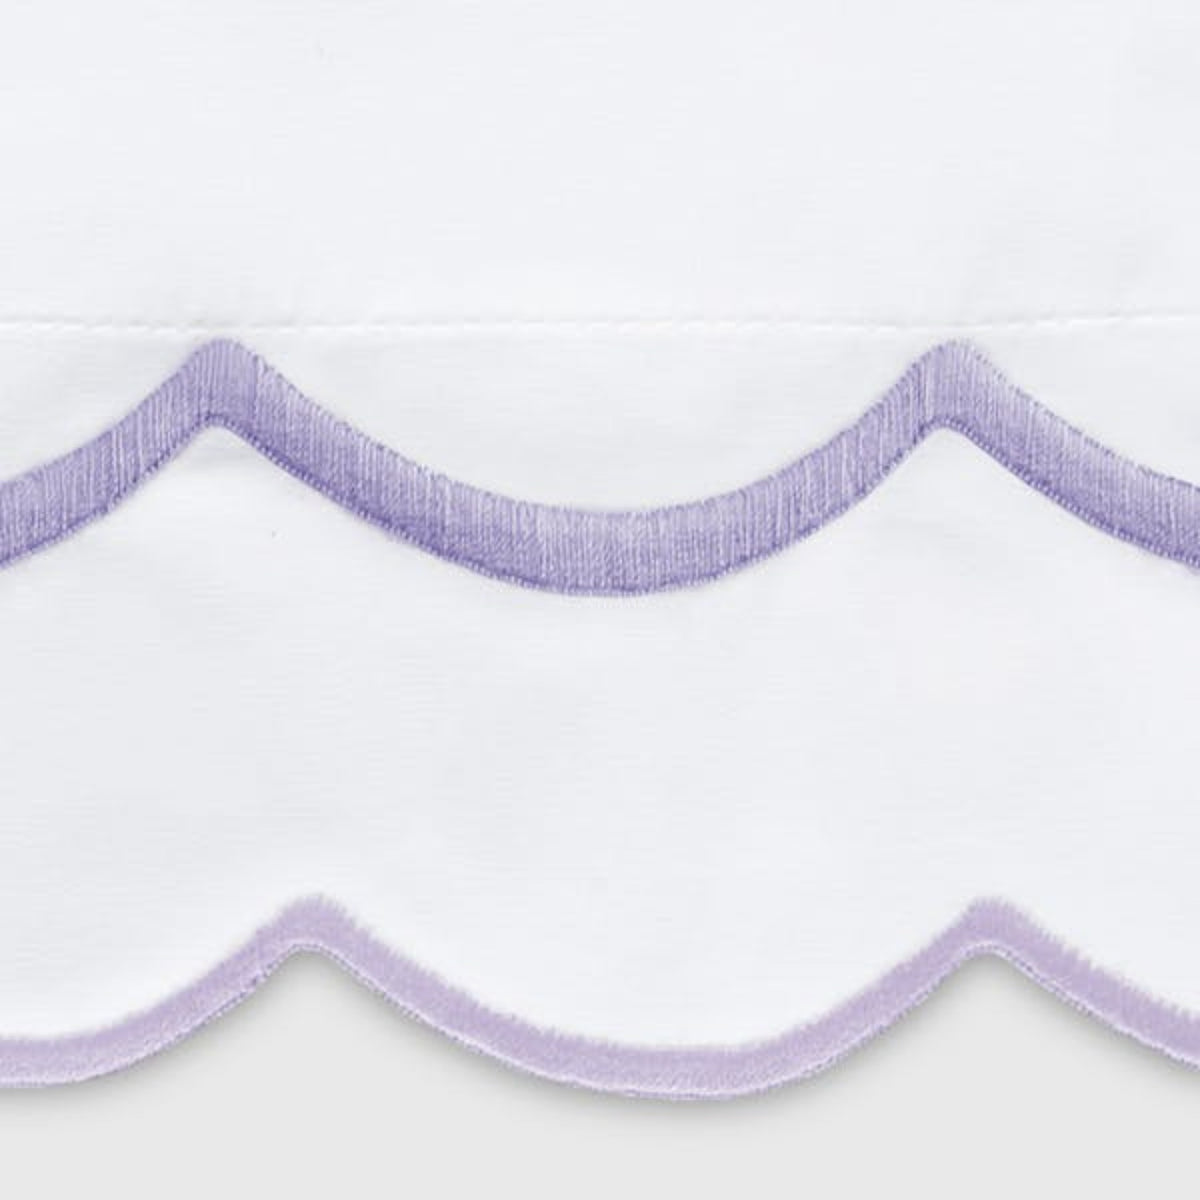 Swatch Sample of Matouk India Bedding in Lilac Color